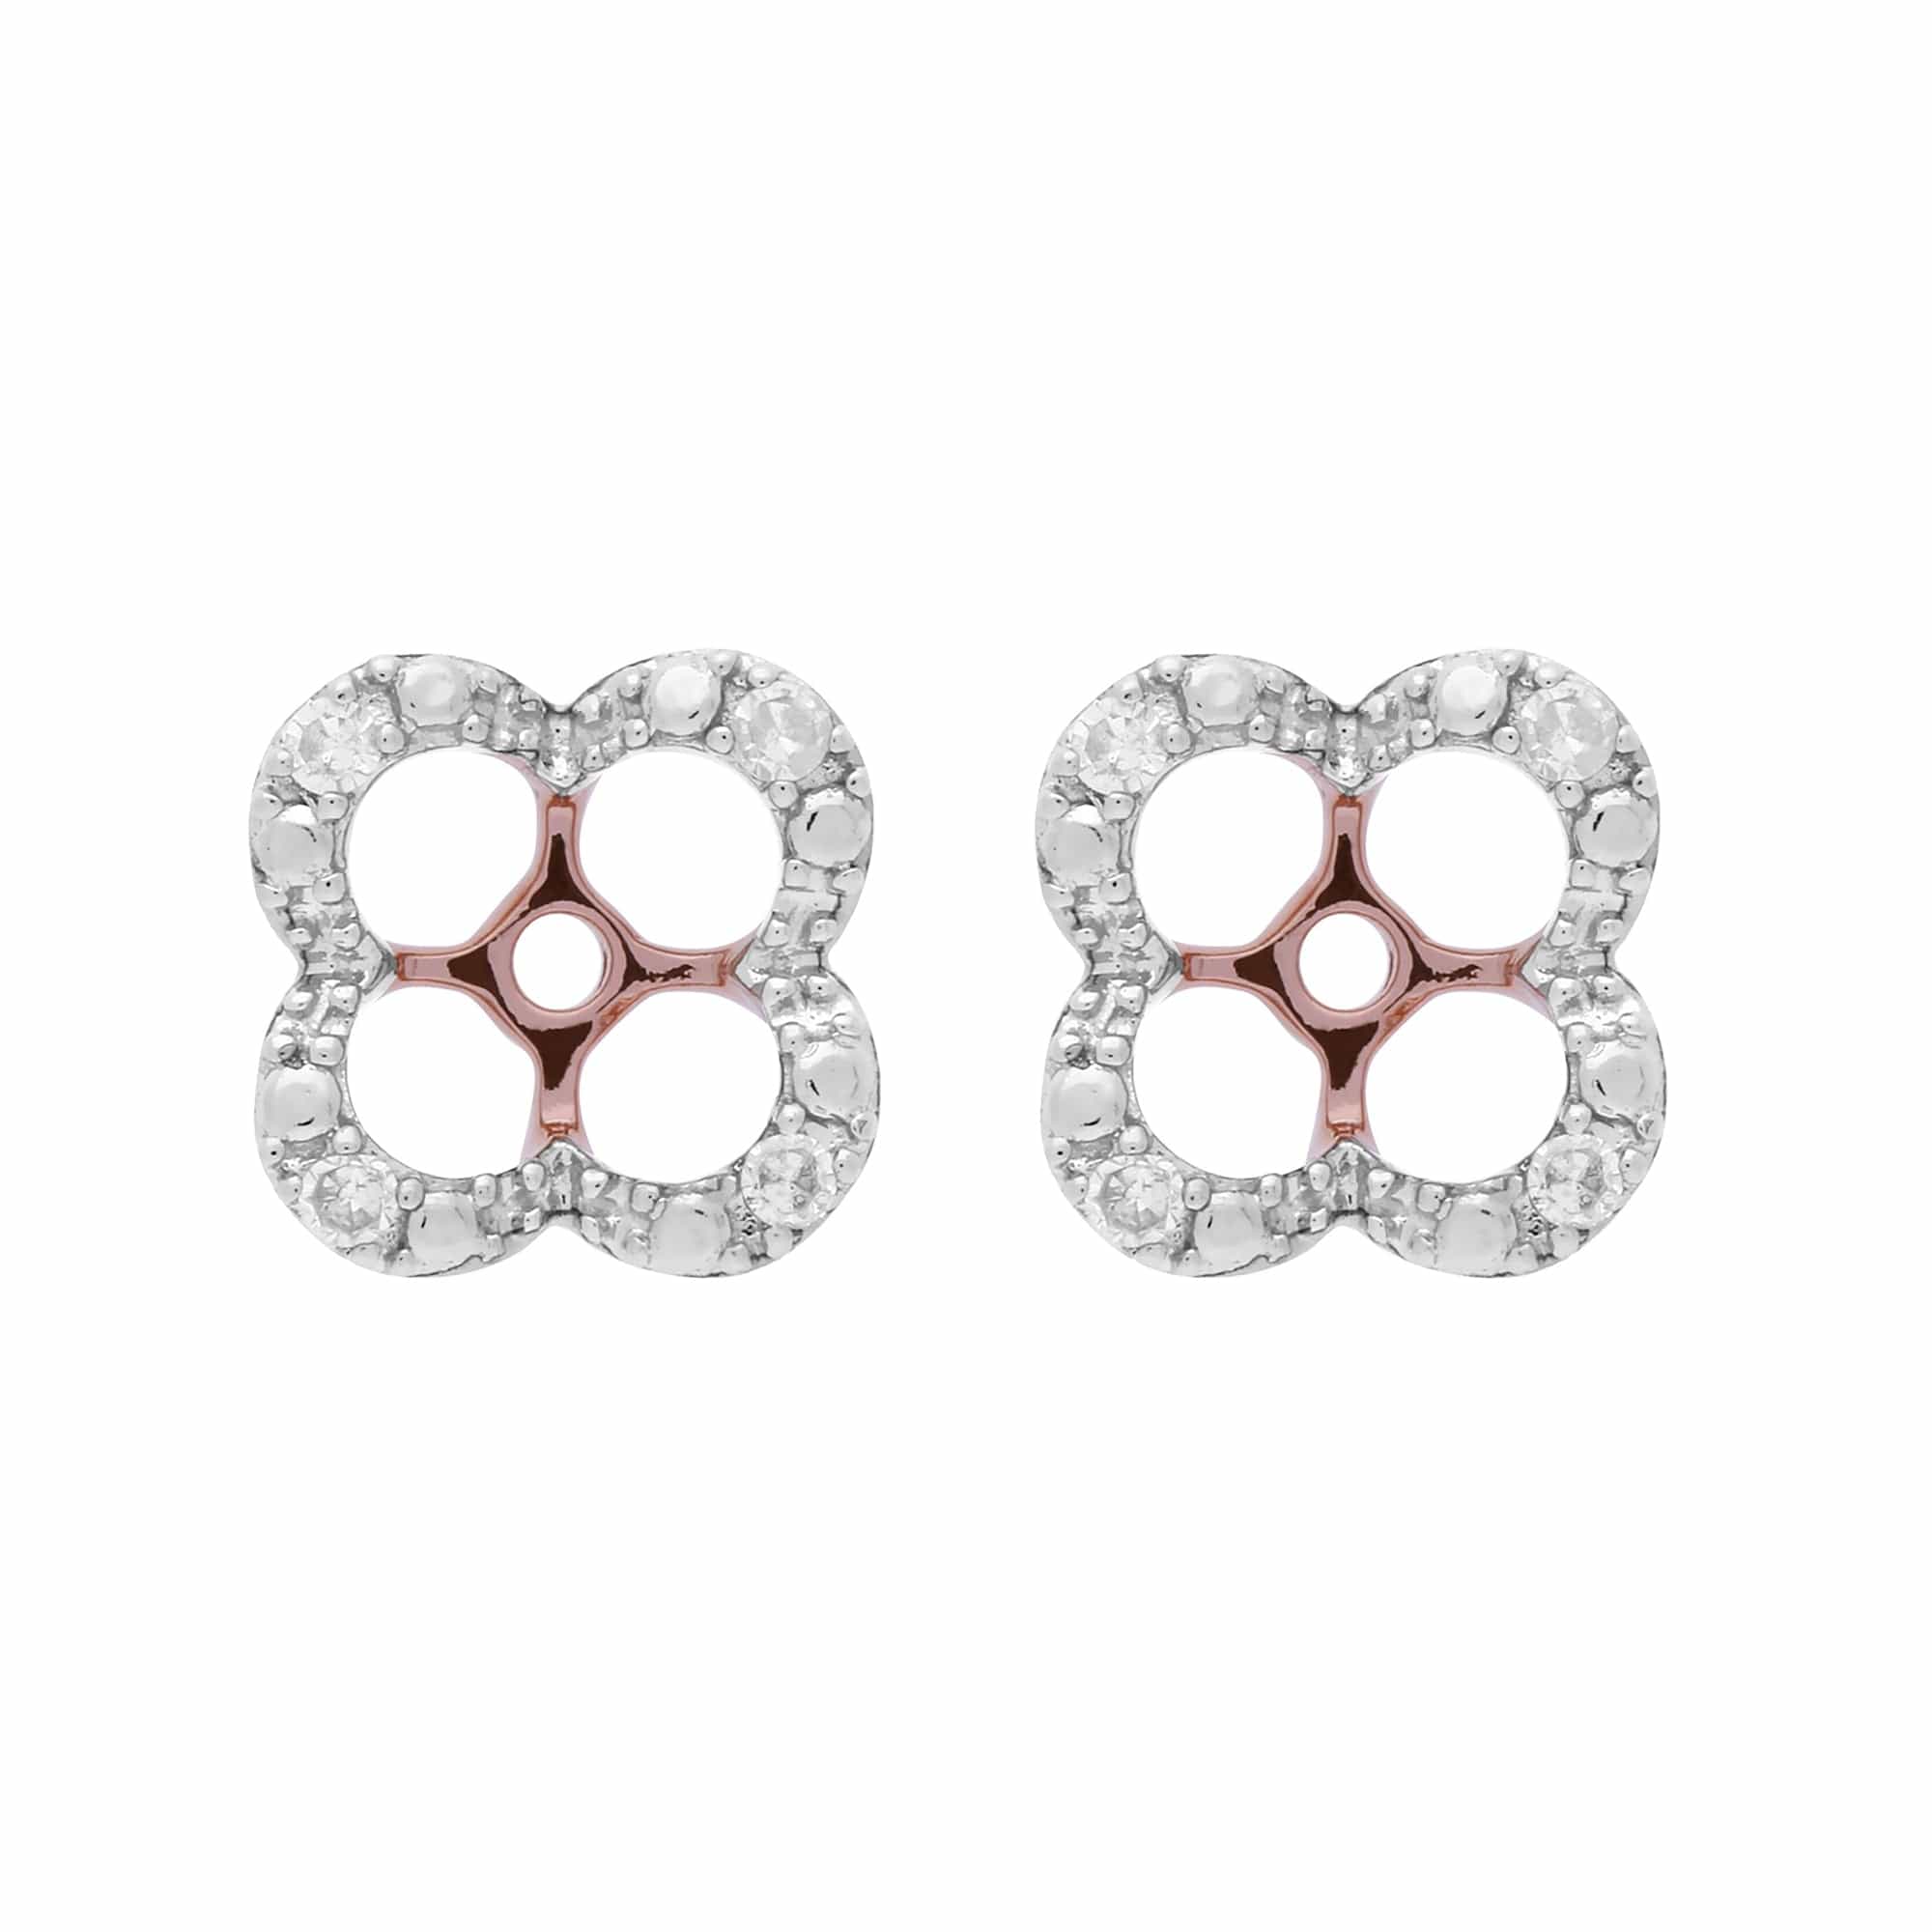 Floral Round Diamond Clover Shape Earrings Jacked in 9ct Rose Gold - Gemondo